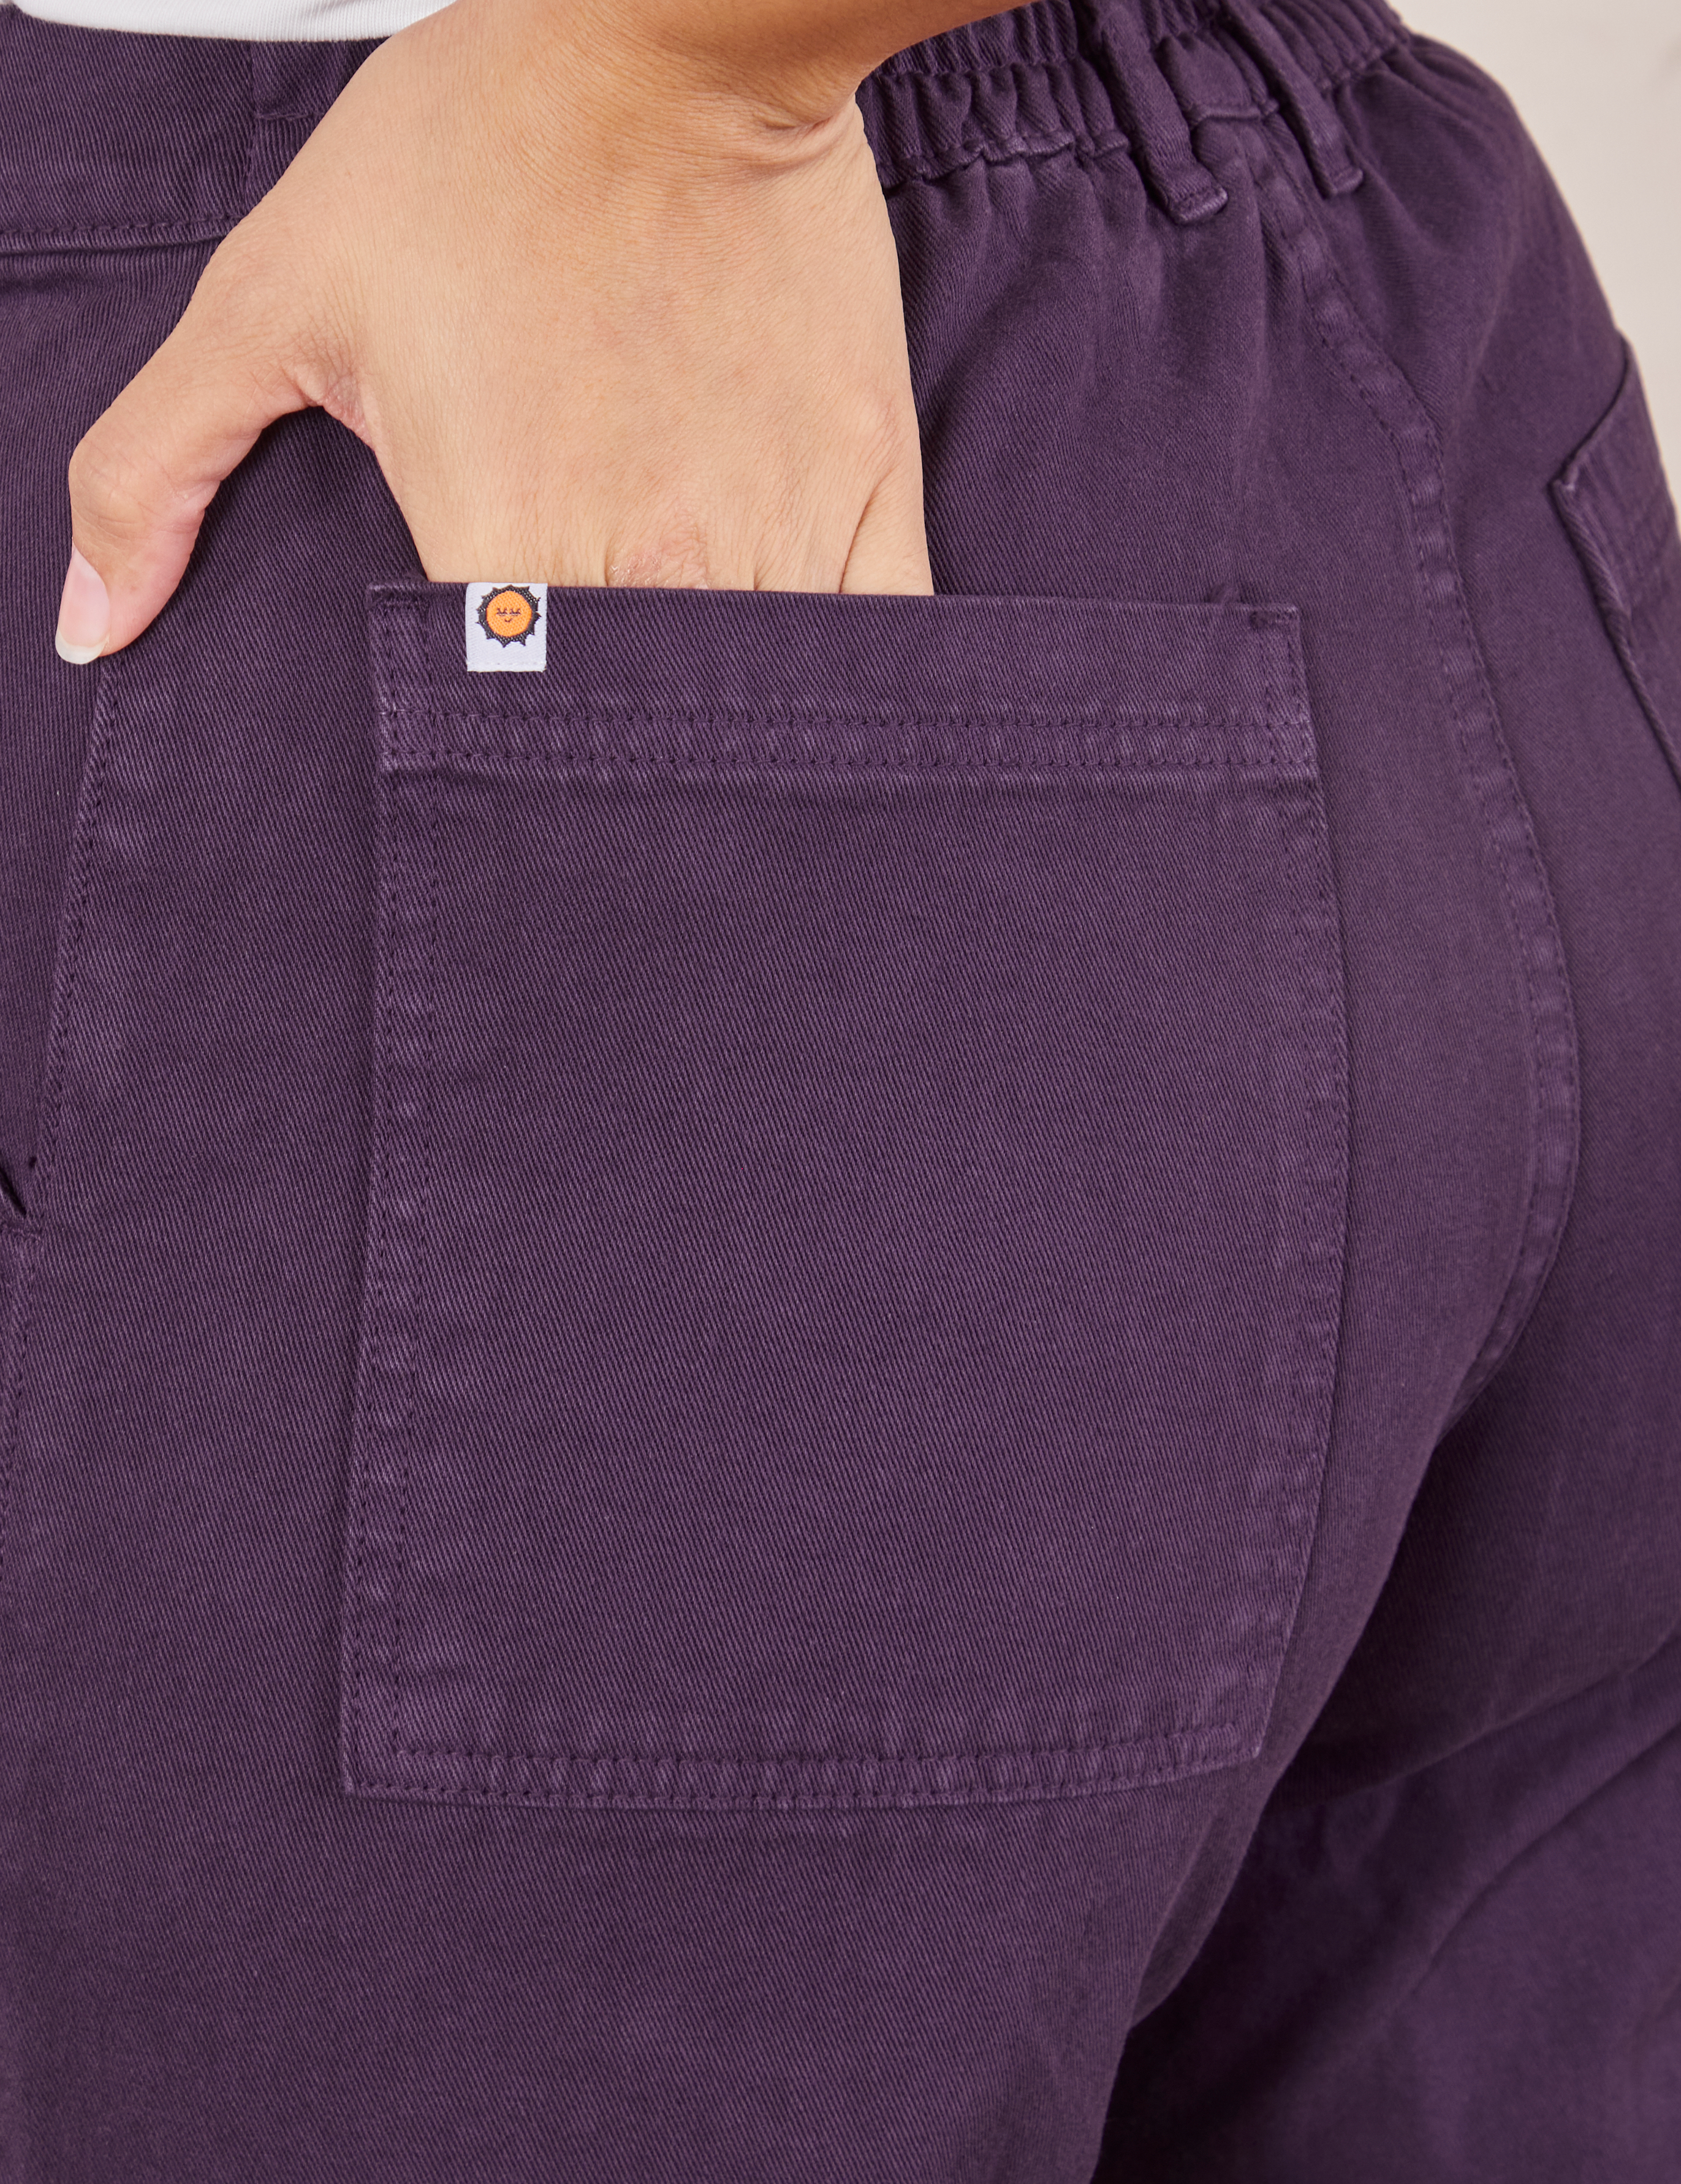 Back pocket close up of Work Pants in Nebula Purple. Tiara has her hand in the pocket.